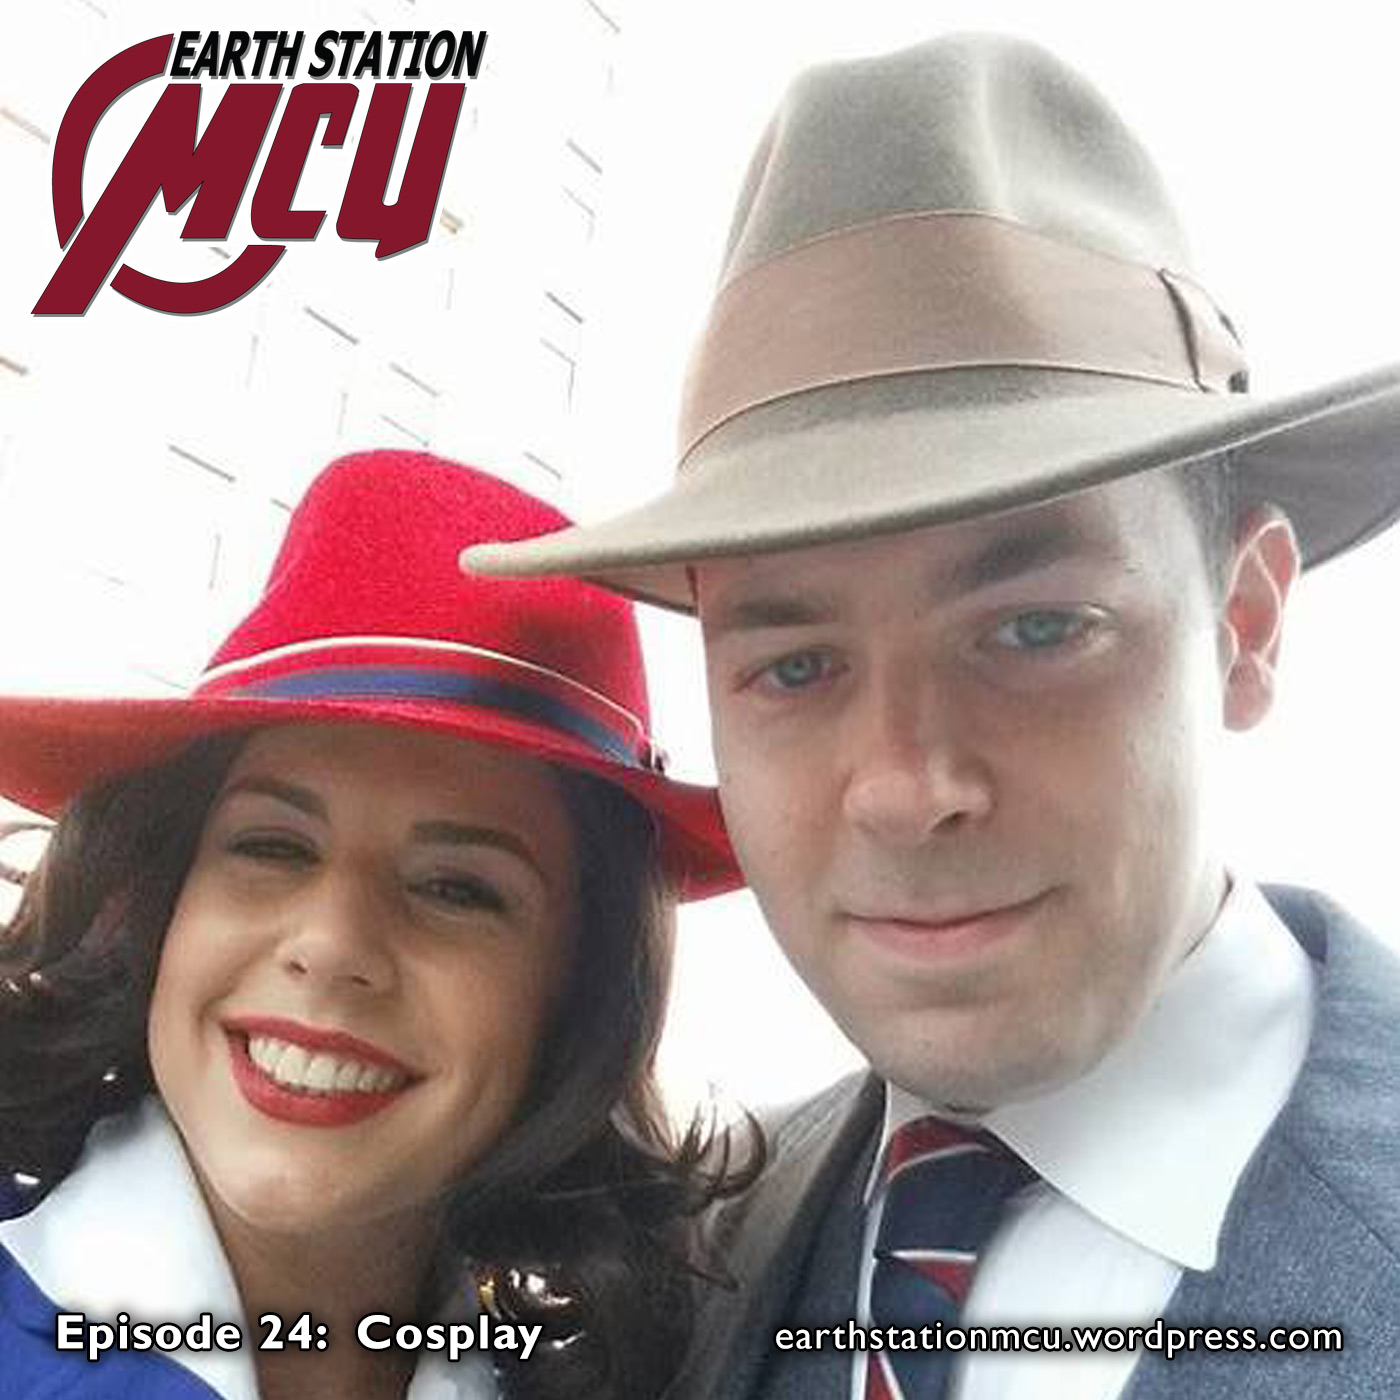 Earth Station MCU - Episode 24: Cosplay